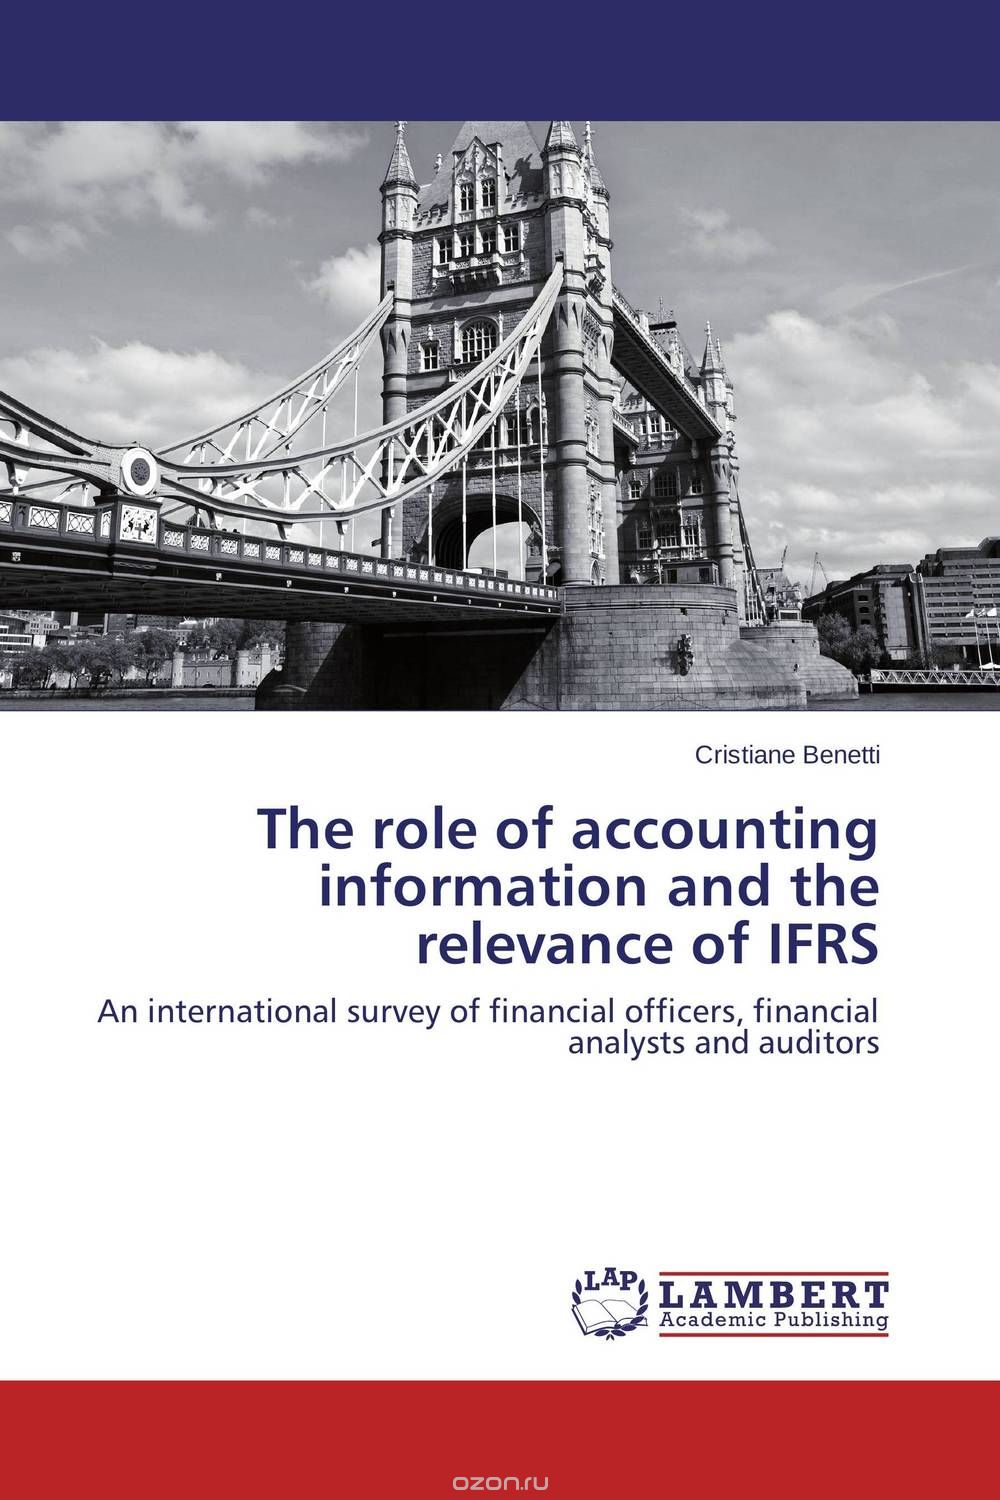 Скачать книгу "The role of accounting information and the relevance of IFRS"